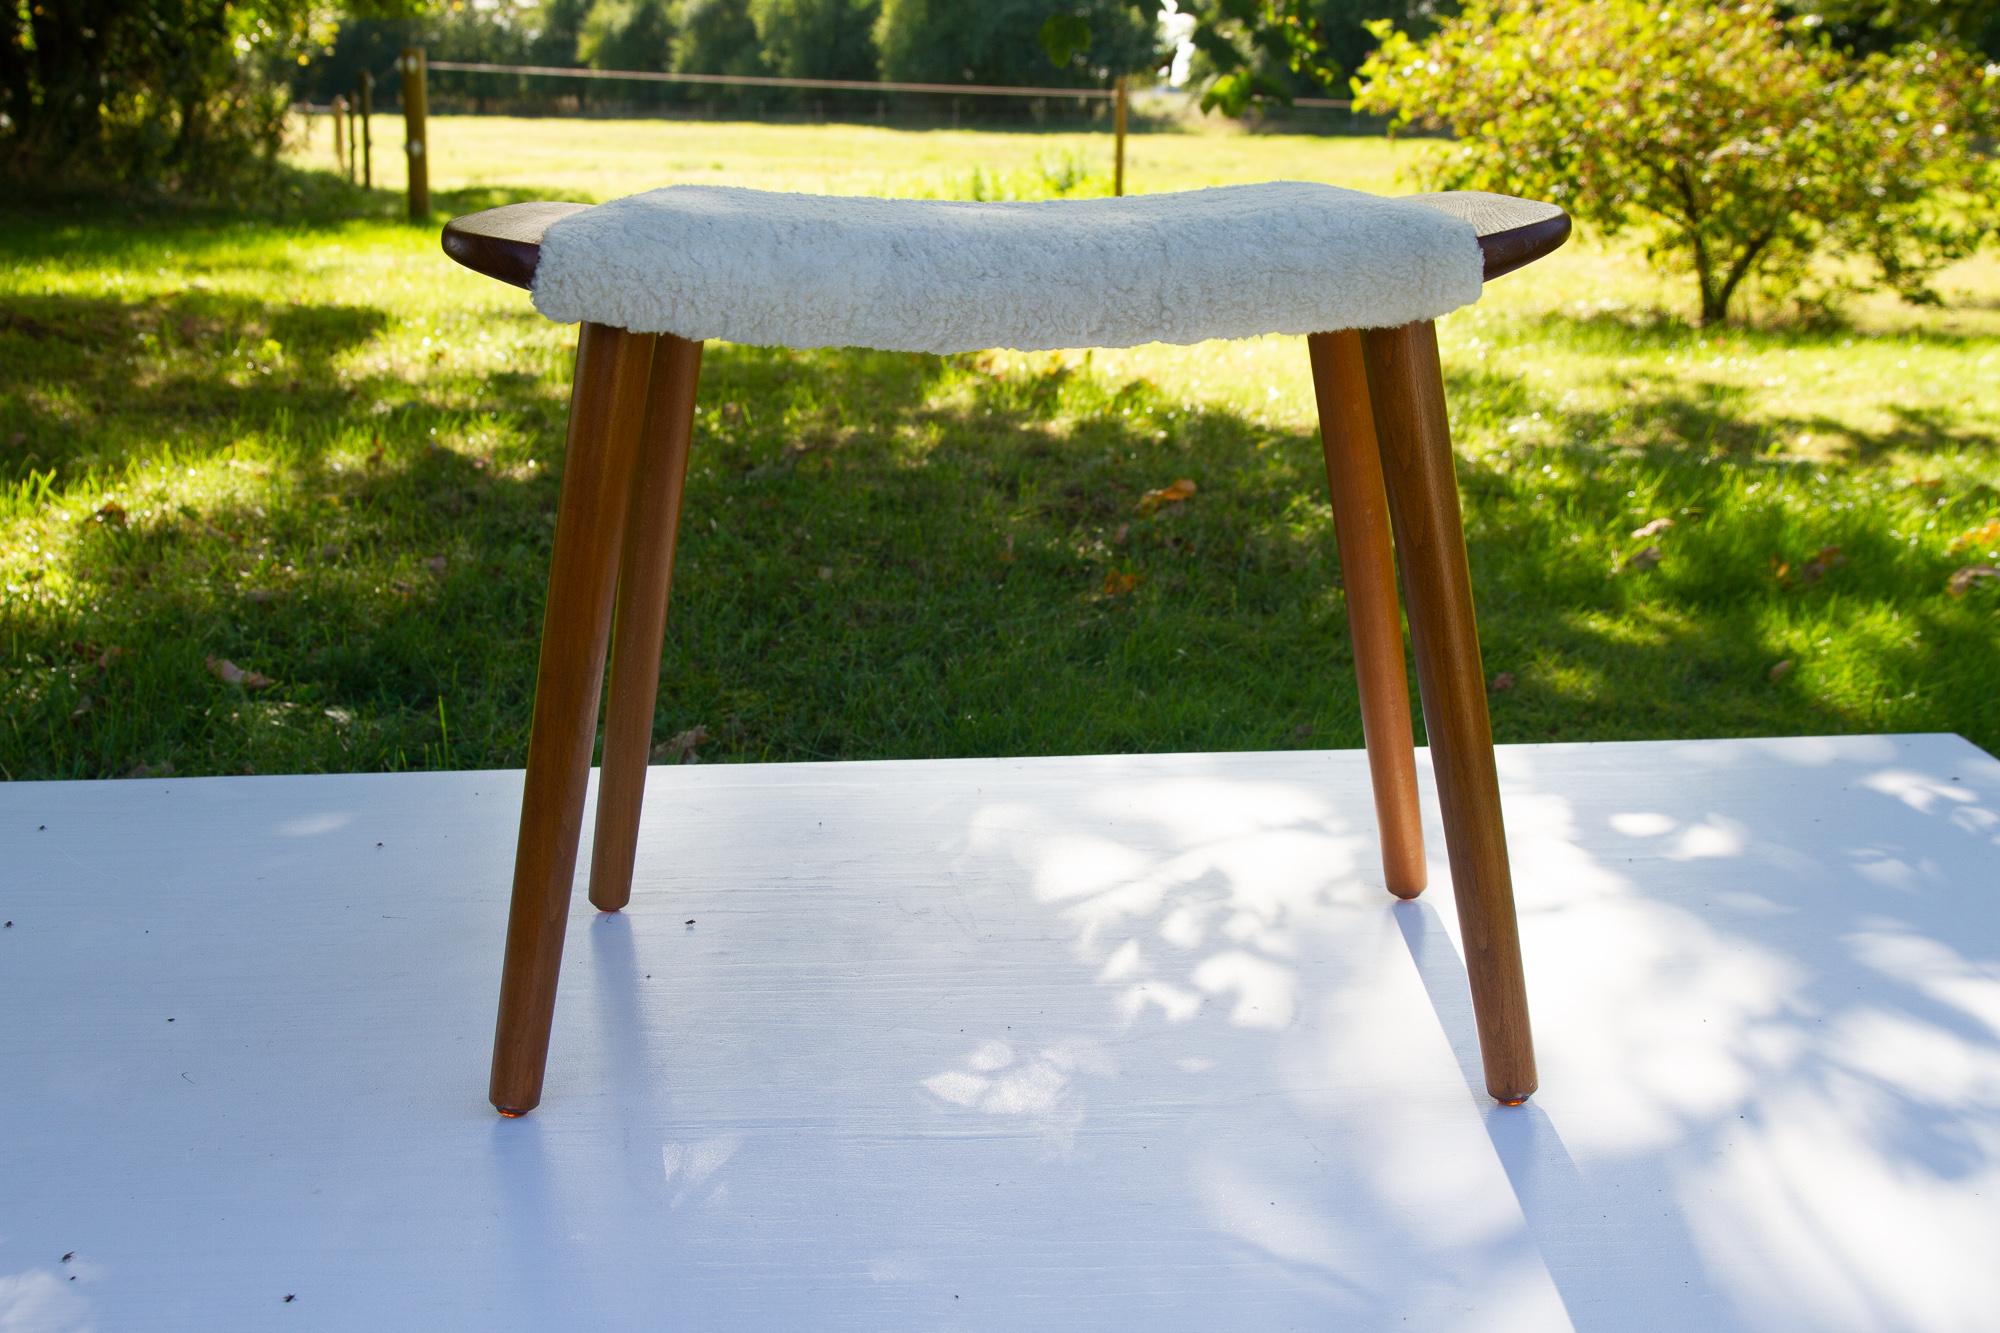 Vintage Danish Teak and Lambskin stool, 1960s
Elegant footrest with curved lambskin covered seat, handles in teak and round tapered legs in beech. Manufactured in Denmark in the 1960s.
Legs can be removed for transport.
Very good original